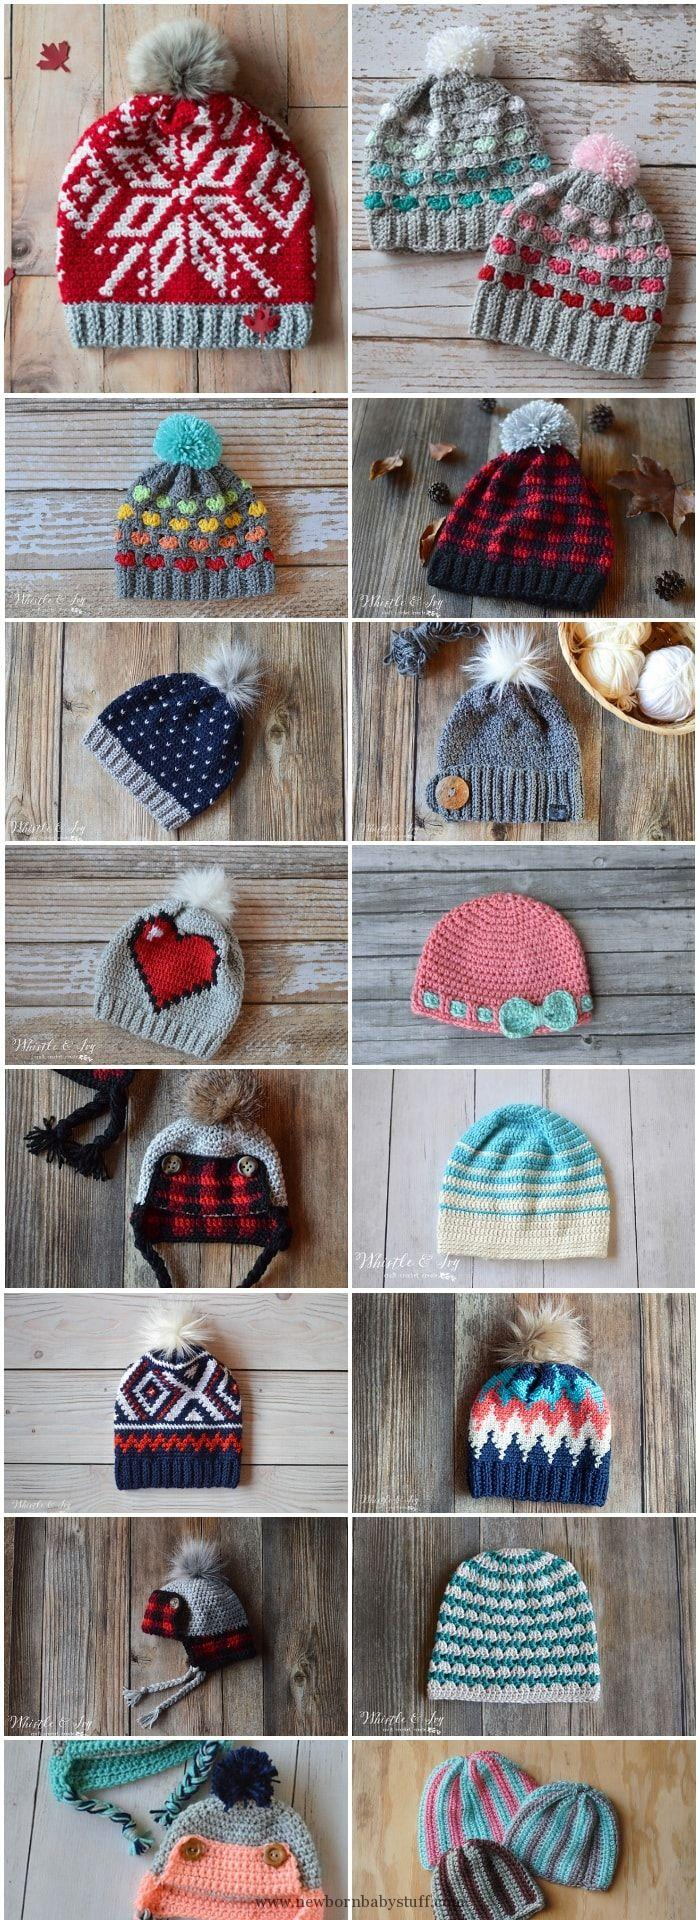 Trendy Baby Knitting Patterns Ba Knitting Patterns 16 Super Cute And Trendy Free Crochet Hat